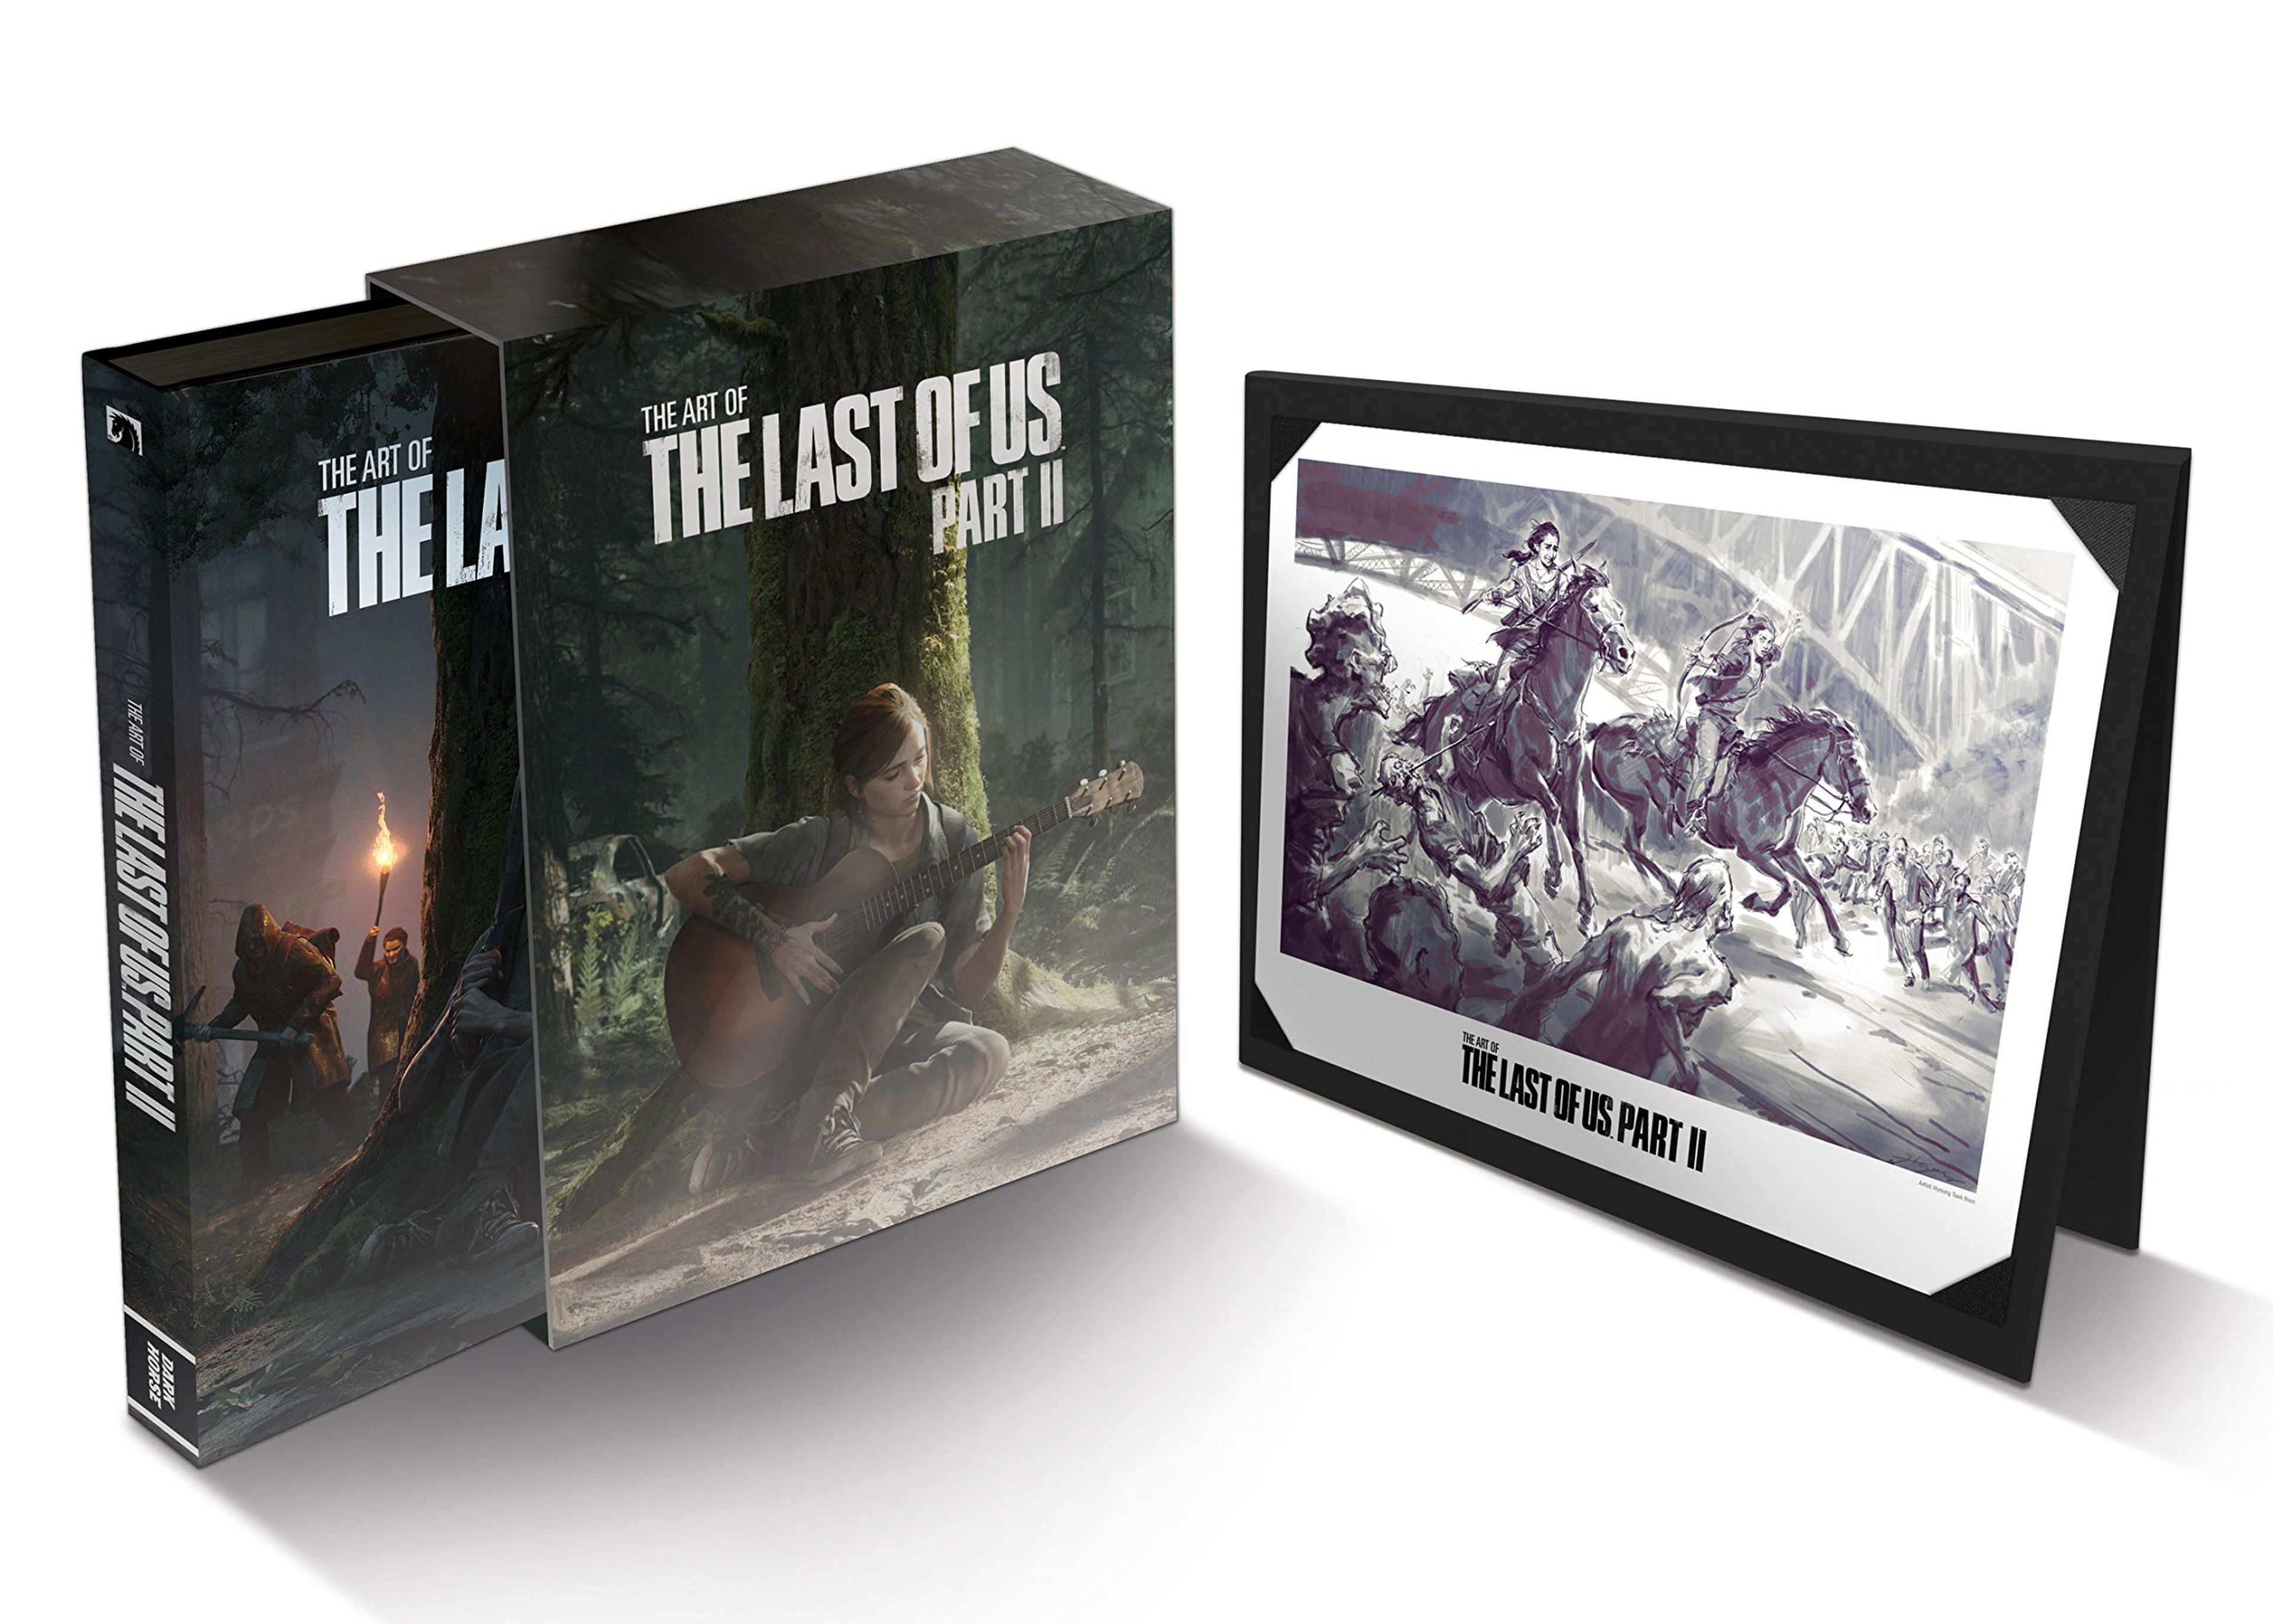 The Art of the Last of Us Parte II